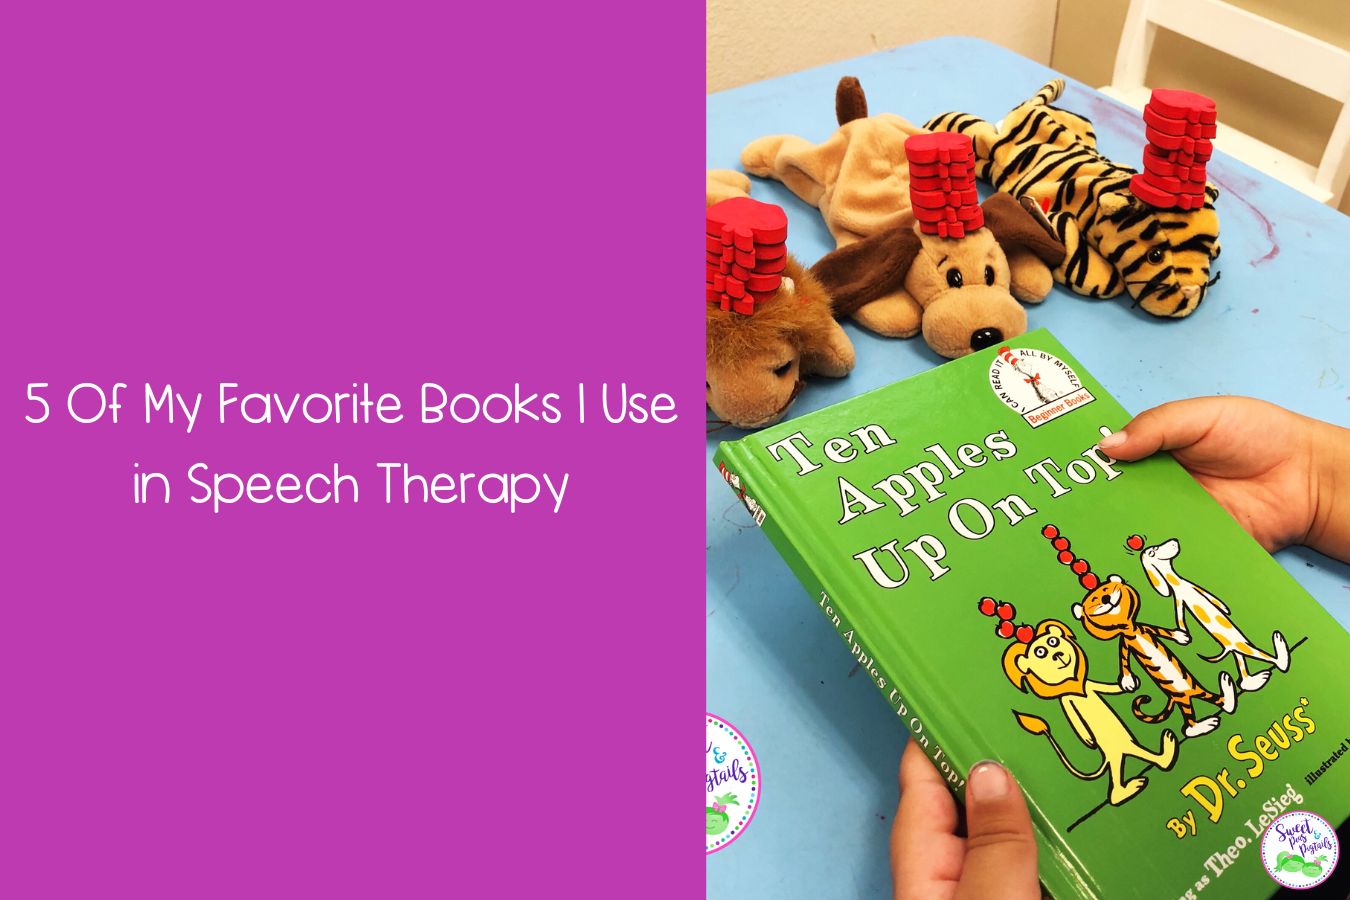 5 Of My Favorite Books I Use in Speech Therapy Featured